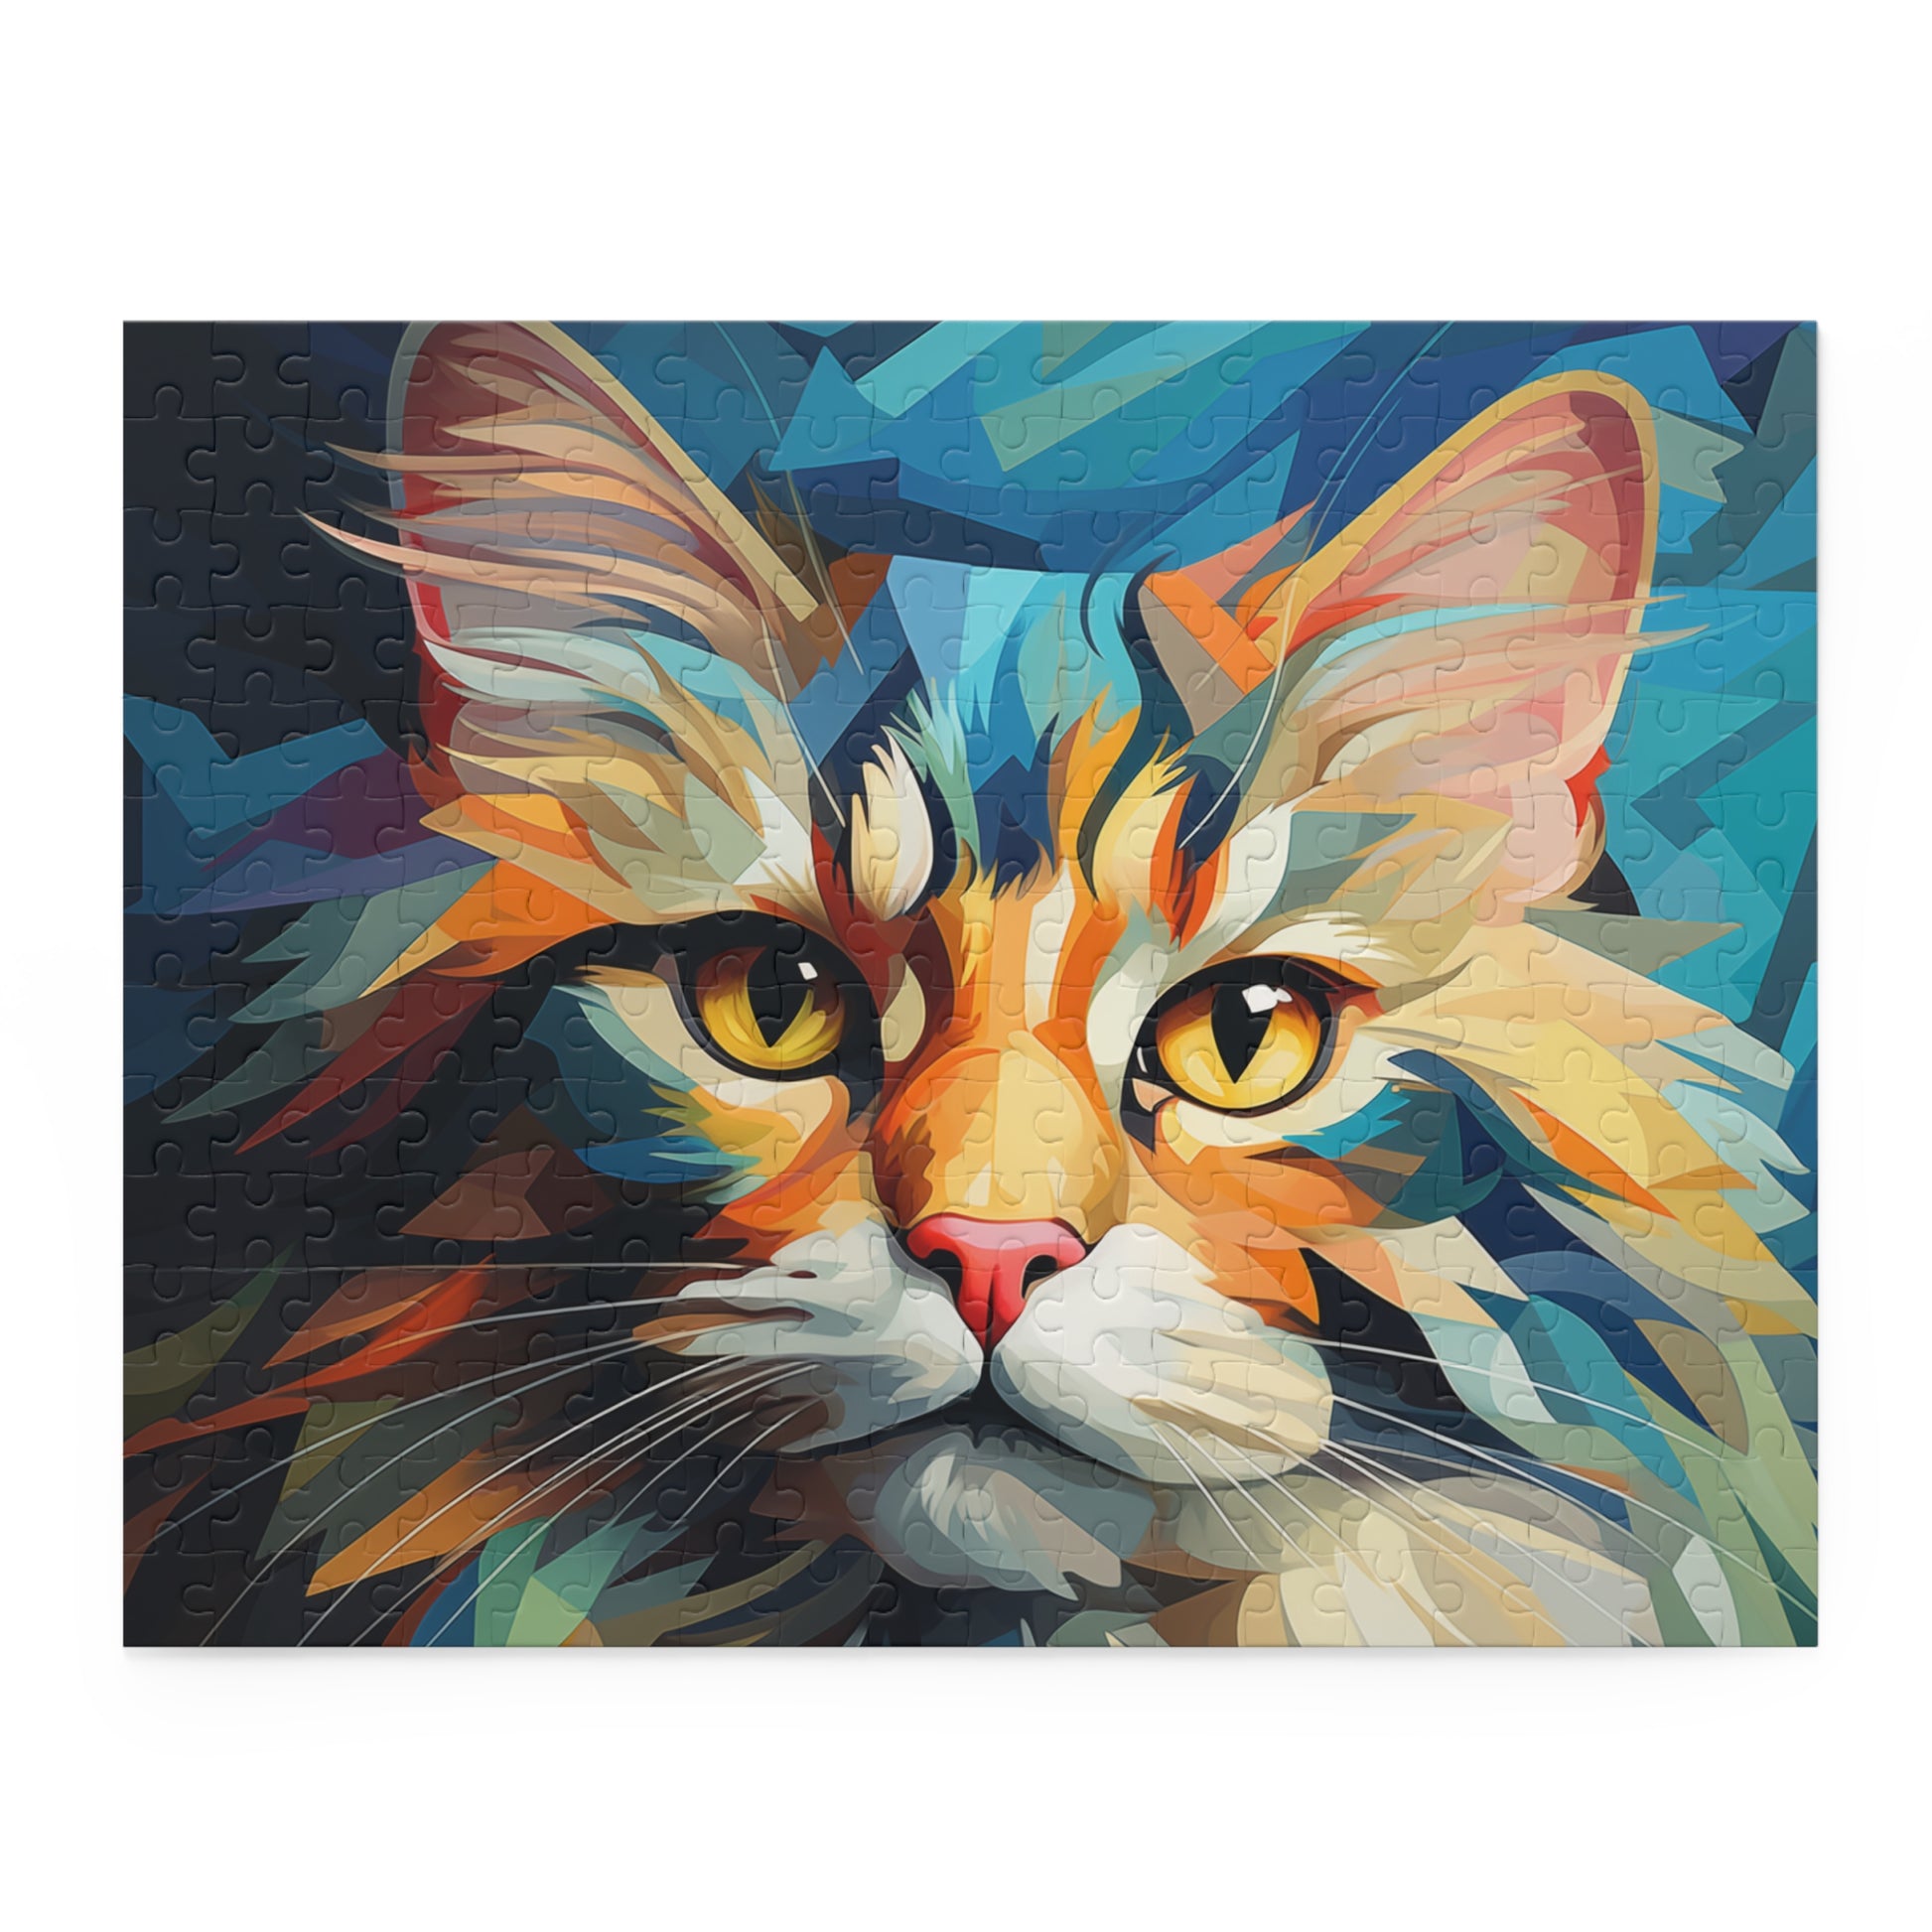 Abstract Oil Paint Watercolor Cat Jigsaw Puzzle Adult Birthday Business Jigsaw Puzzle Gift for Him Funny Humorous Indoor Outdoor Game Gift For Her Online-3